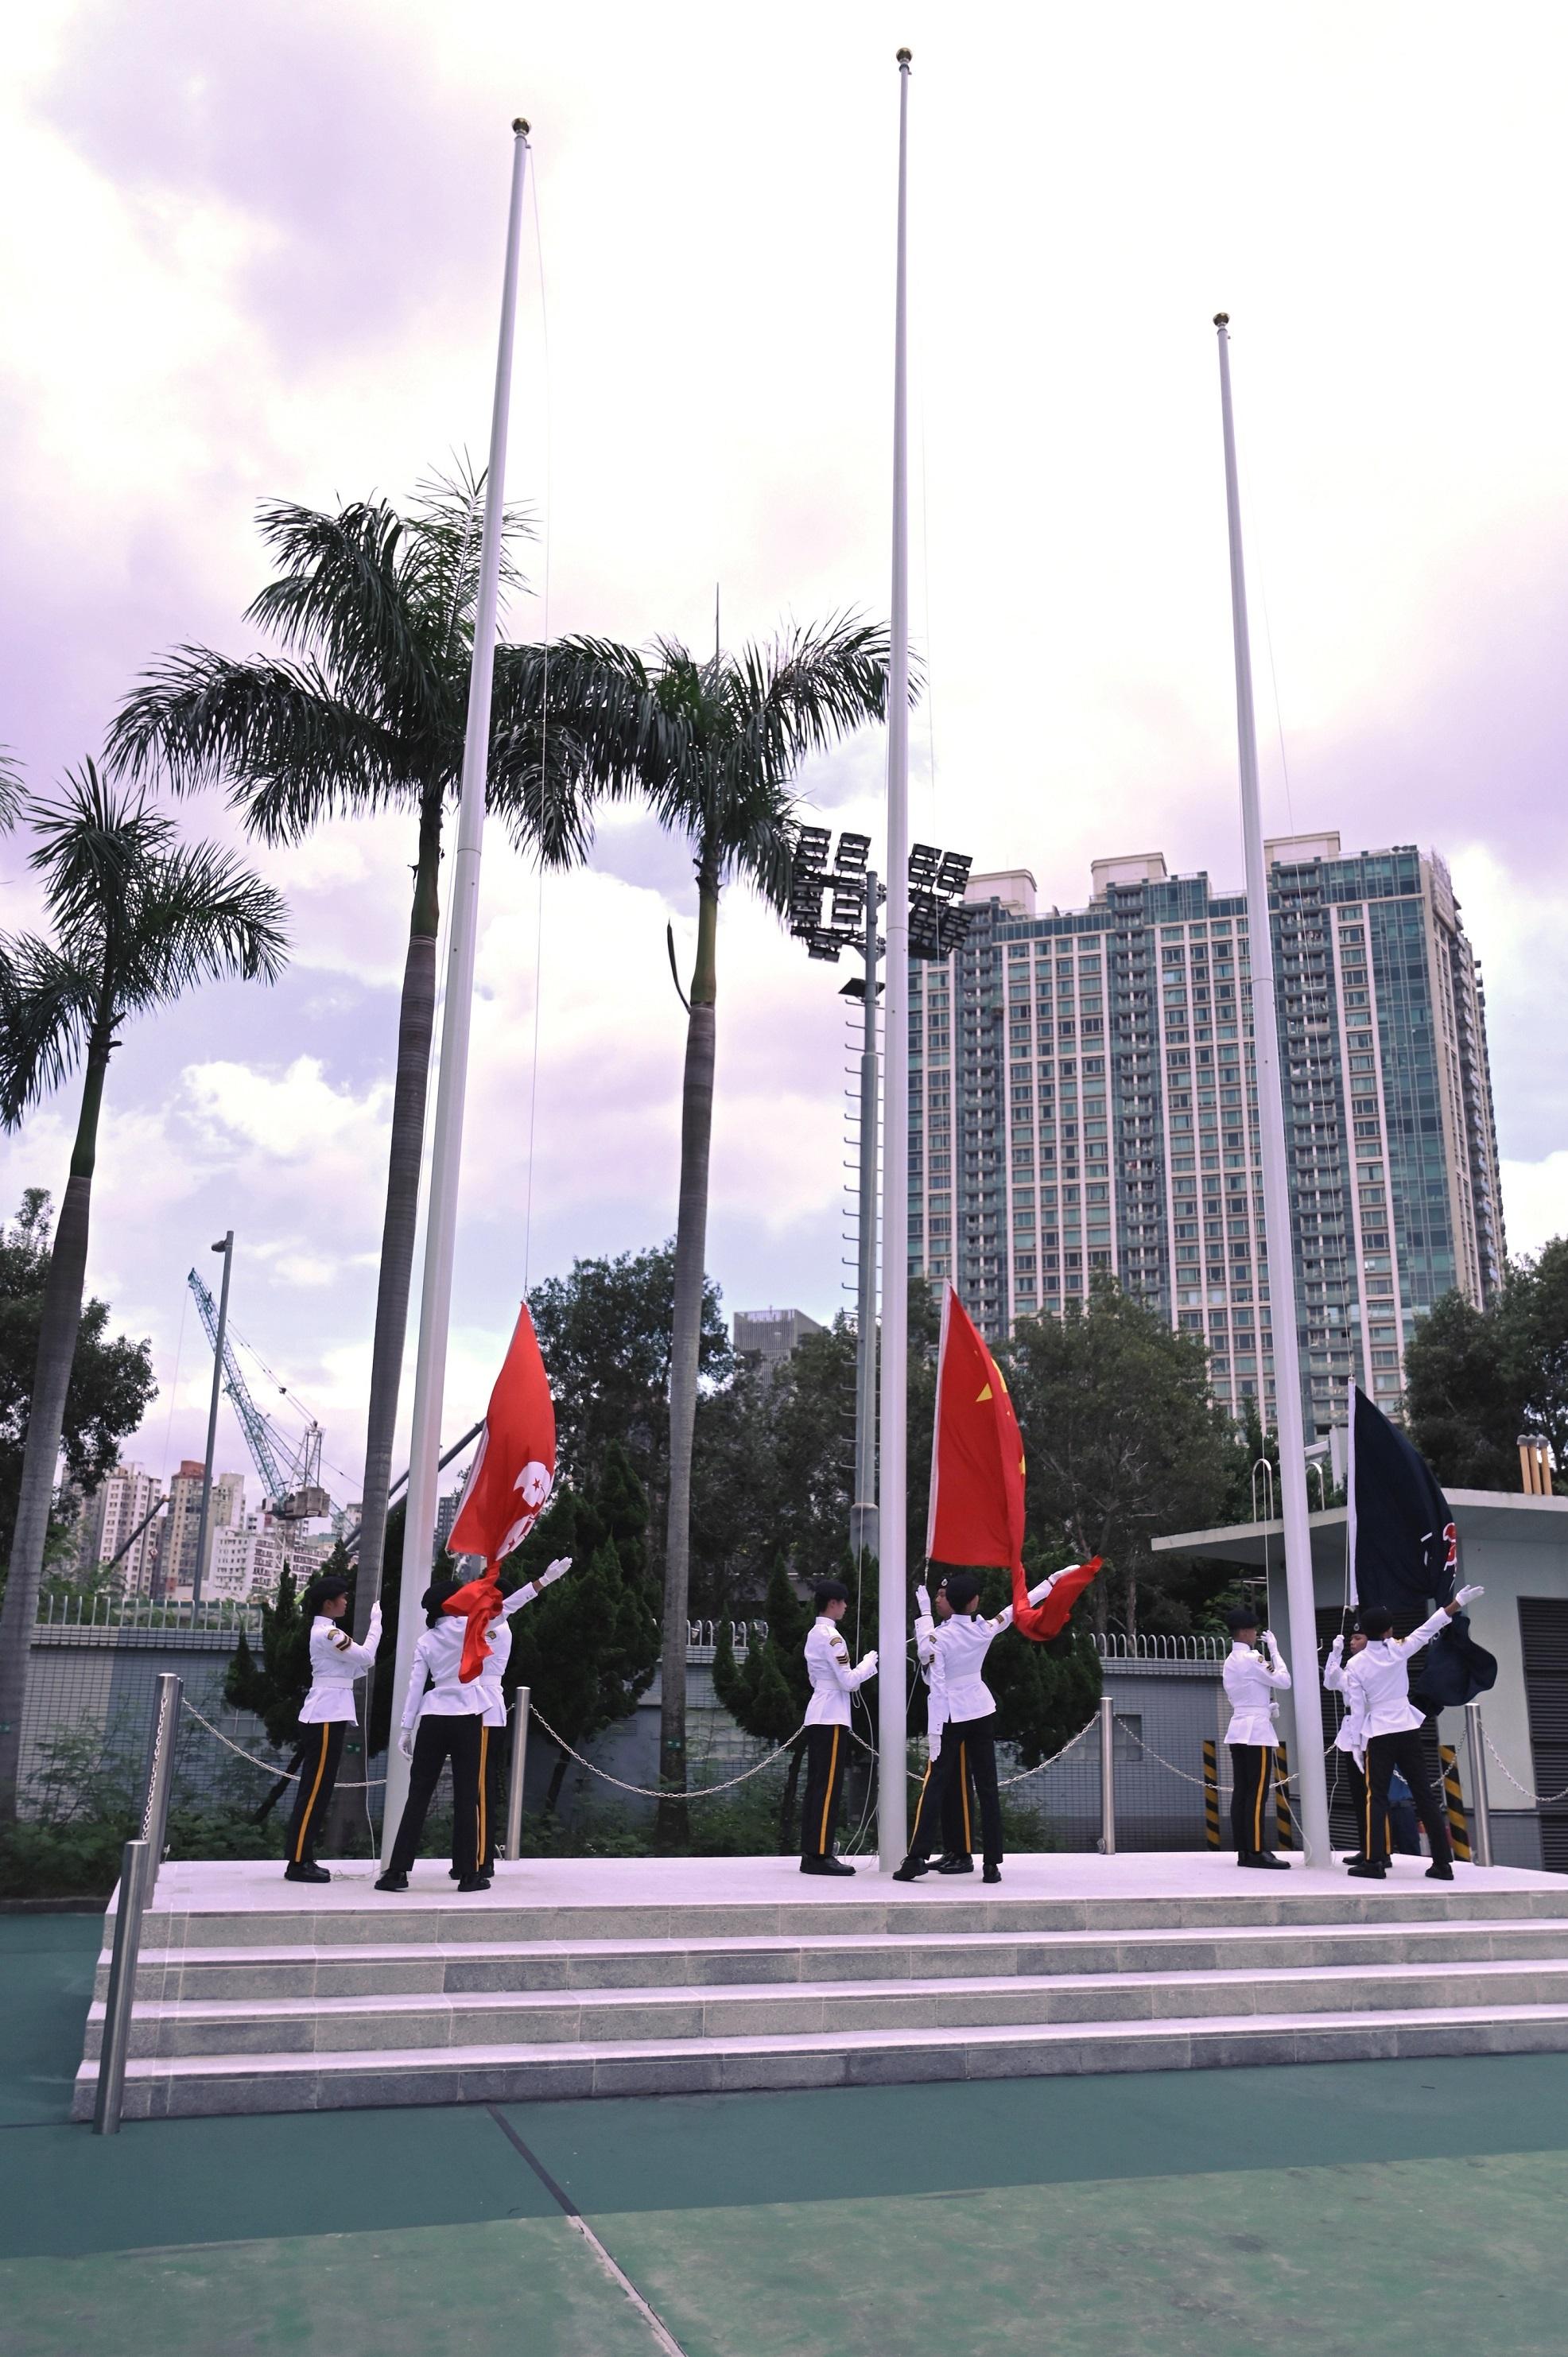 The Civil Aid Service Cadet Corps held the 138th New Cadets Passing-out Parade today (August 26). Photo shows the Cadet Corps Guard of Honour performing a flag-raising ceremony.
